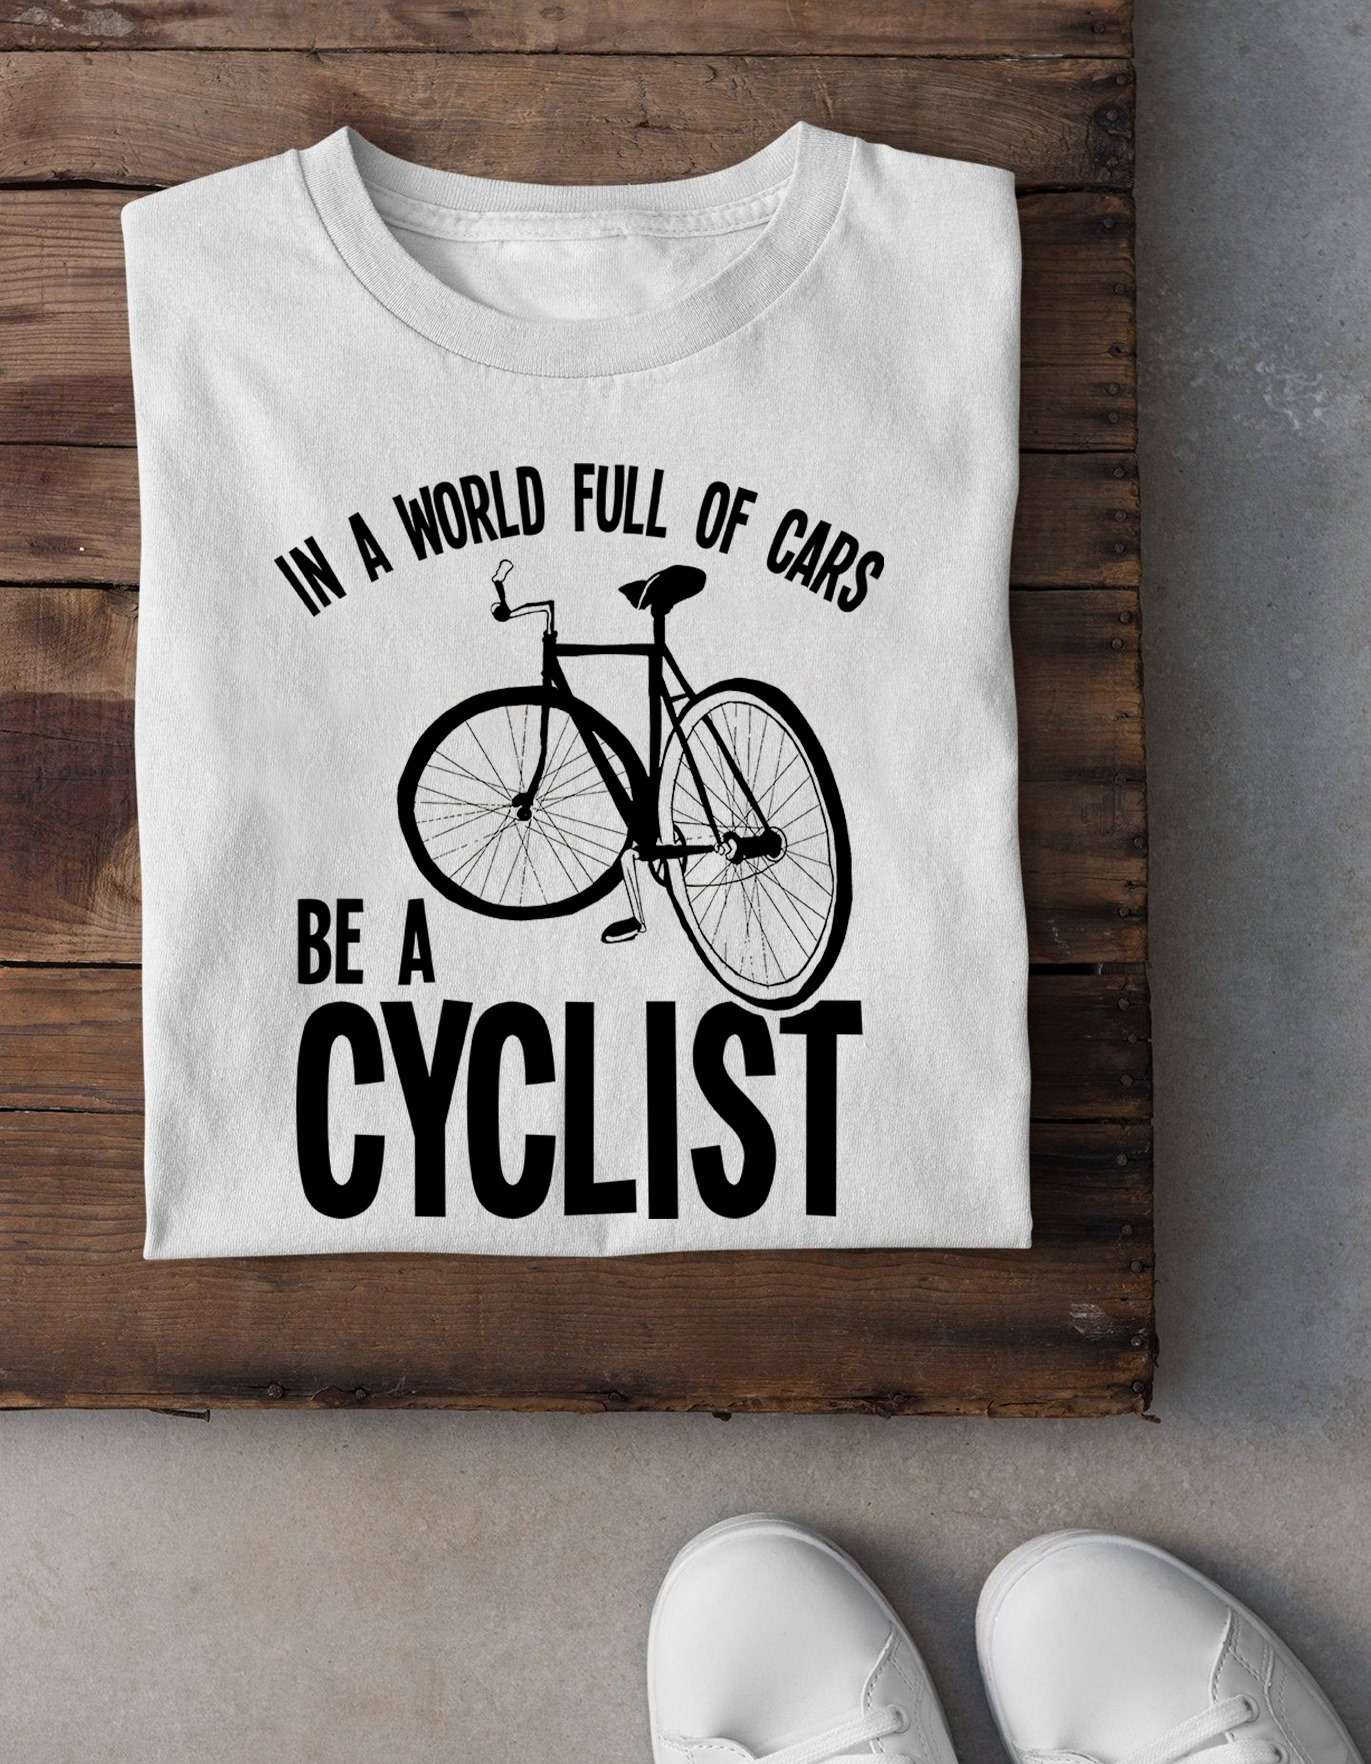 In a world full of cars be a cyclist - Life behind bar, love cycling